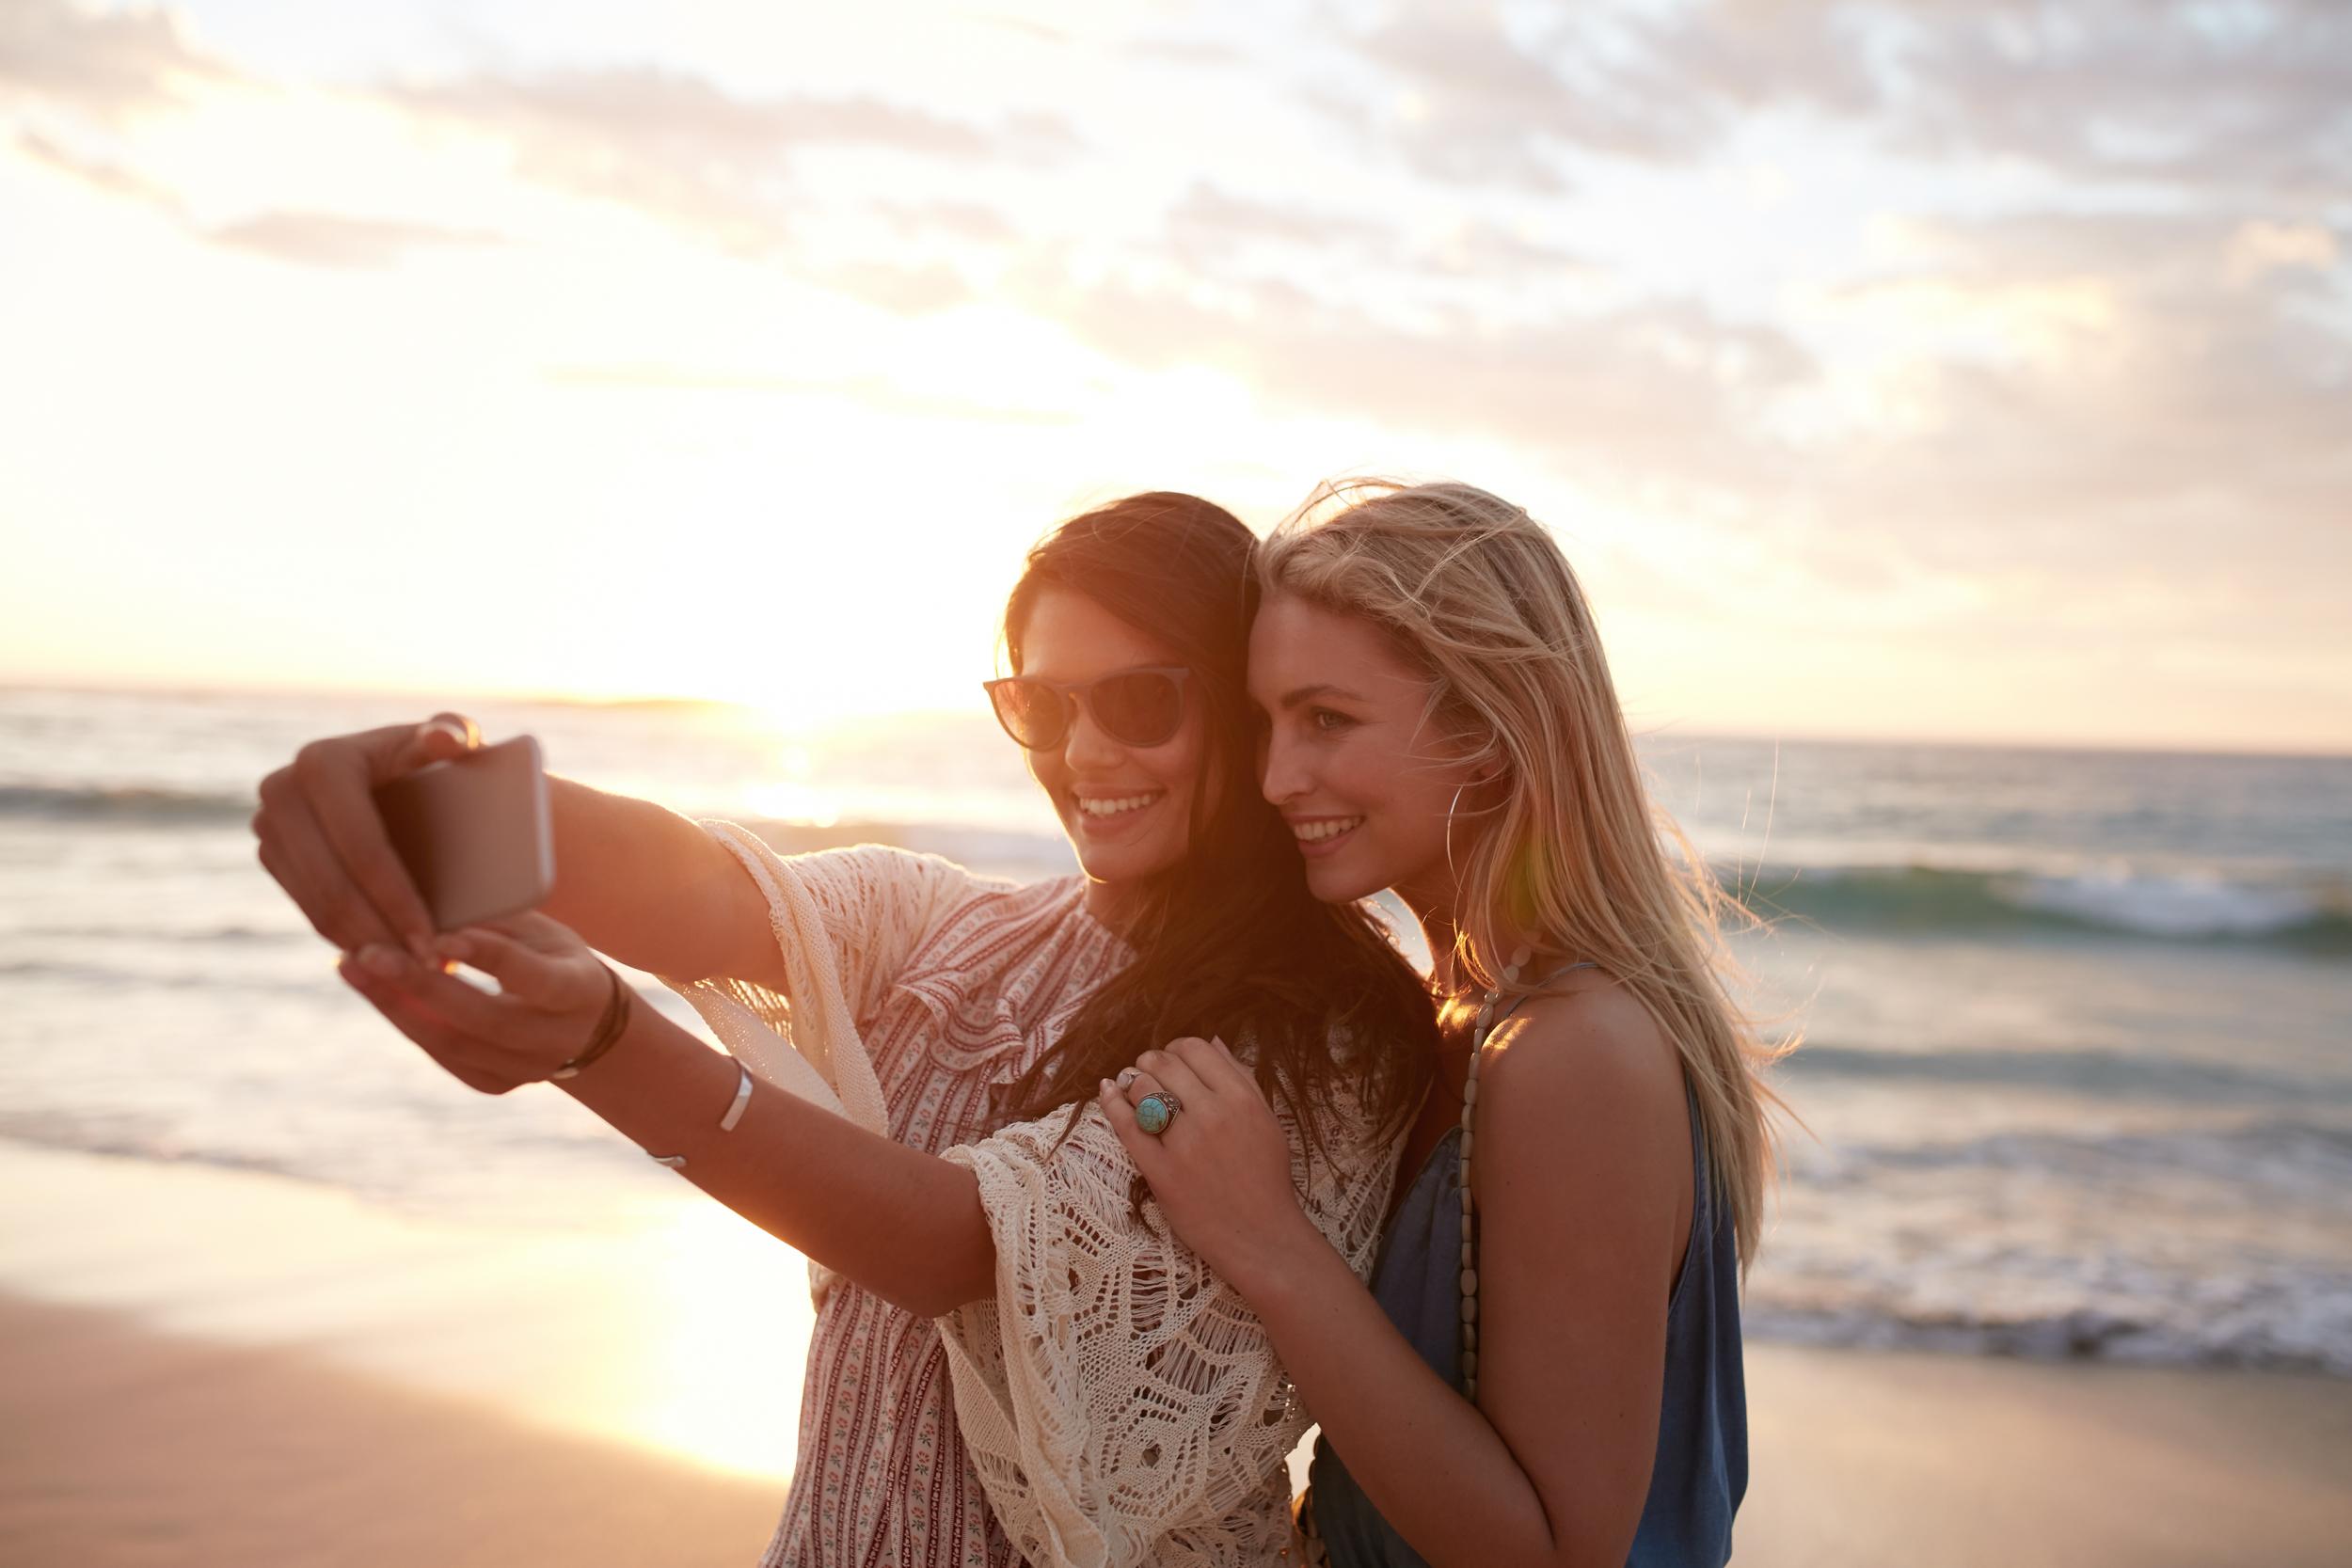 Save the holiday snaps until you return home, holidaymakers warned